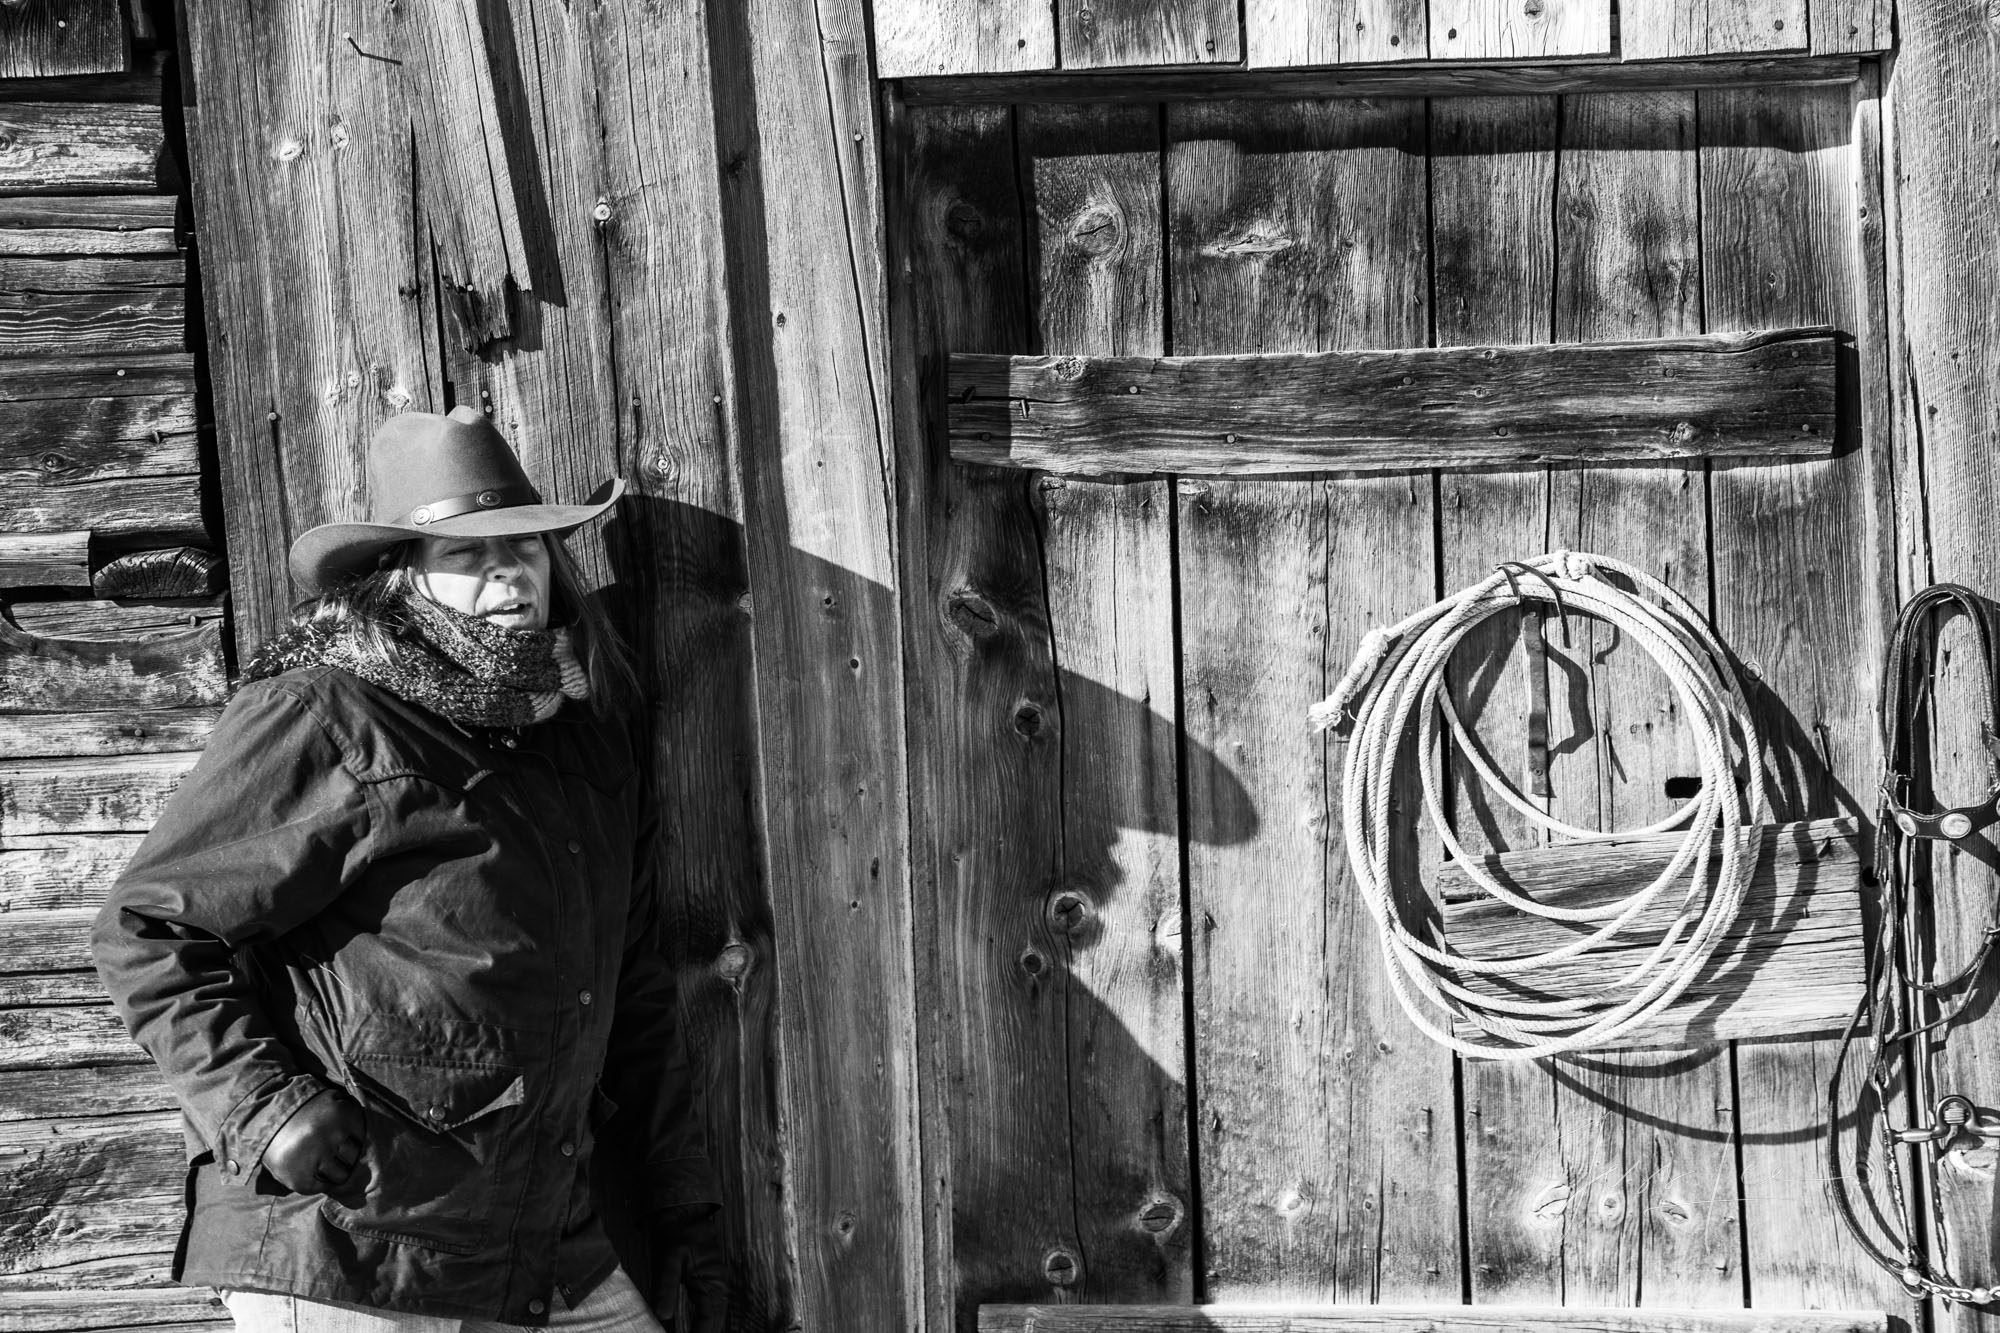 Fine Art Limited Edition Photo Prints of Cowboys, Horses, and life in the West.  Cowboy pictures in black and white. Taking a...